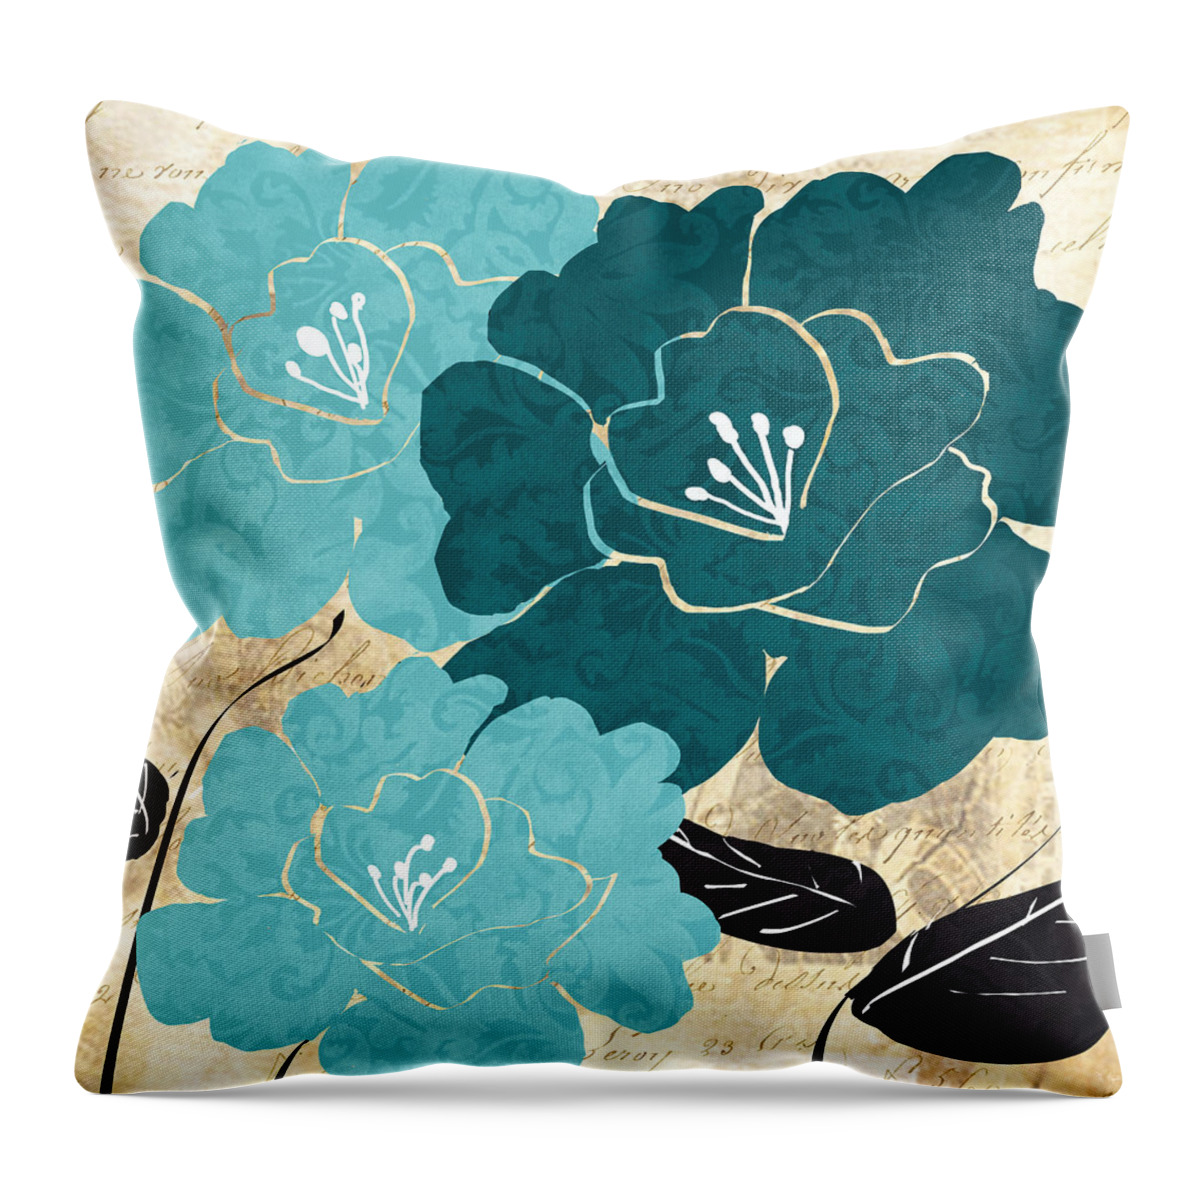 Turquoise Throw Pillow featuring the painting Turquoise Flowers by Lourry Legarde